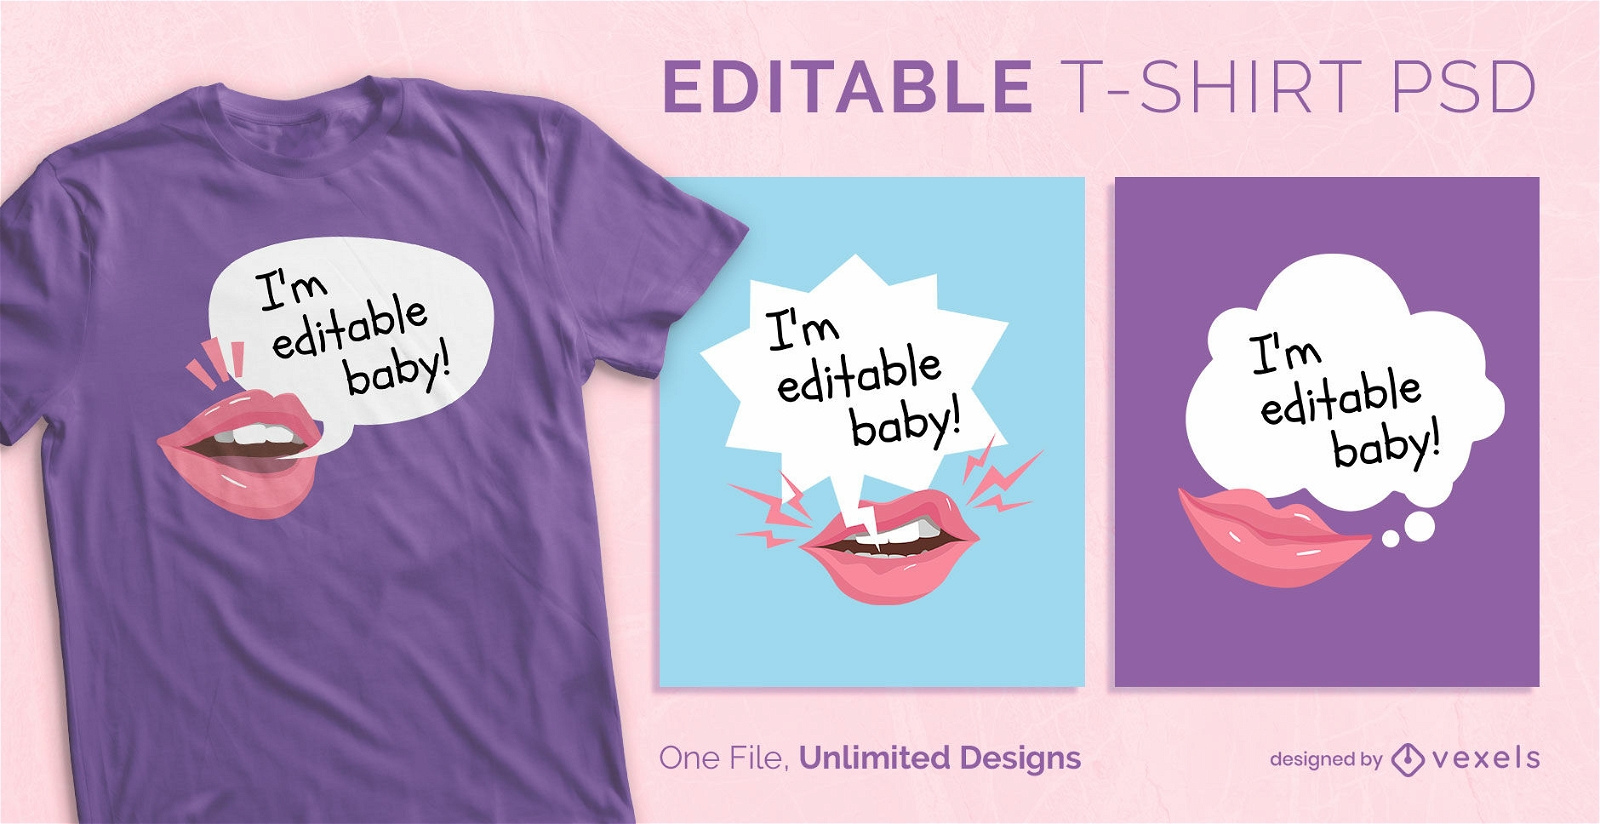 Mouths with speech bubbles scalable t-shirt psd